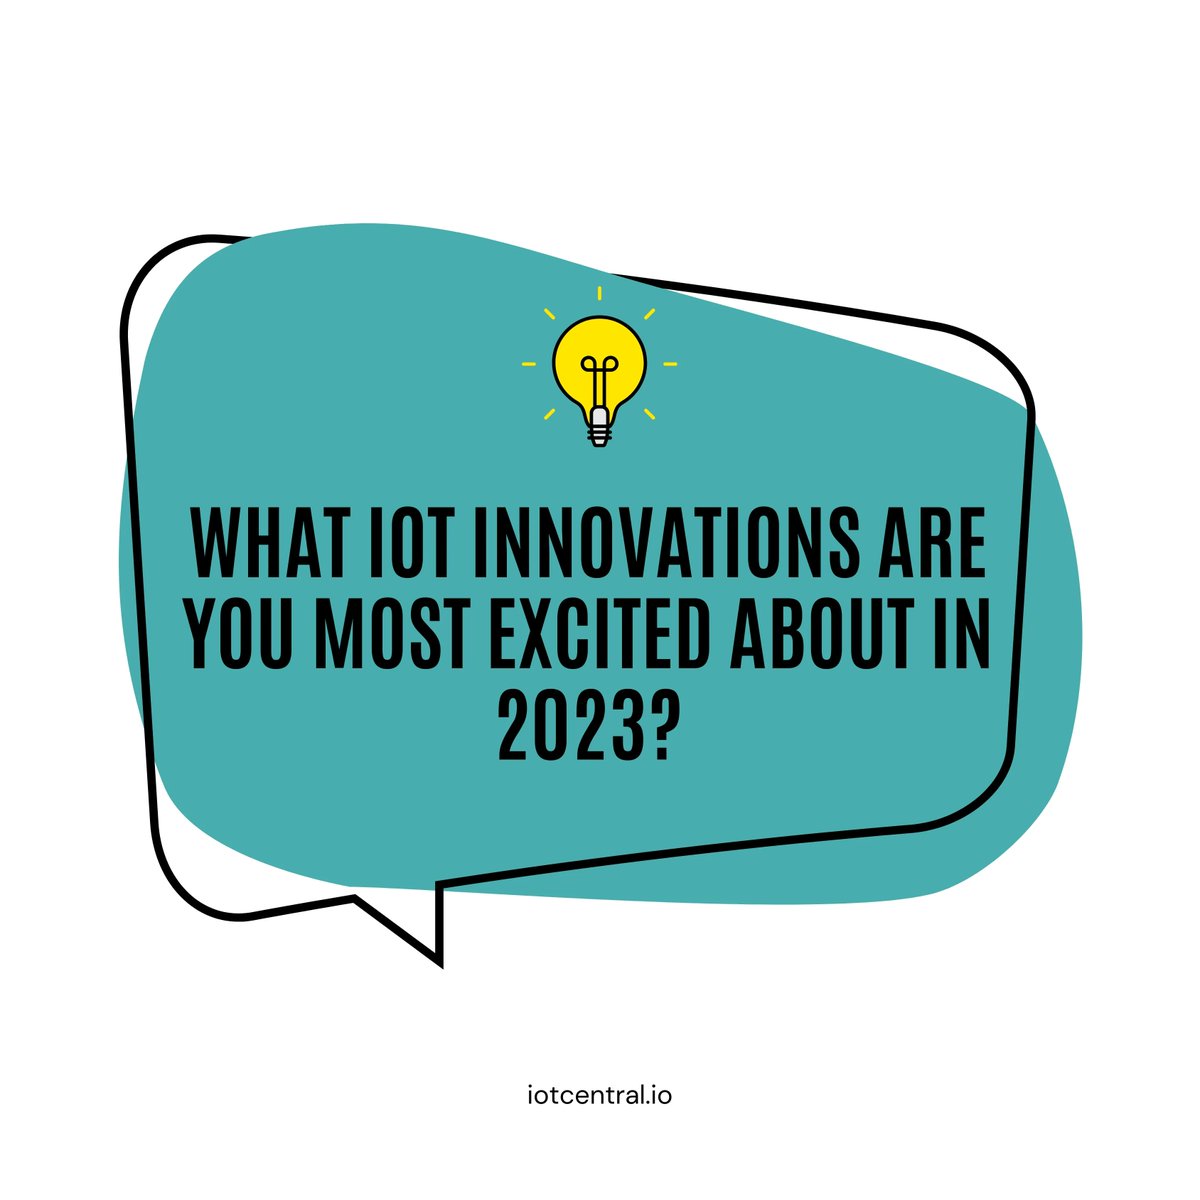 What are you most looking forward to in the world of IoT this year? 

Share your top pick! 

#IoTTrends #TechInnovation